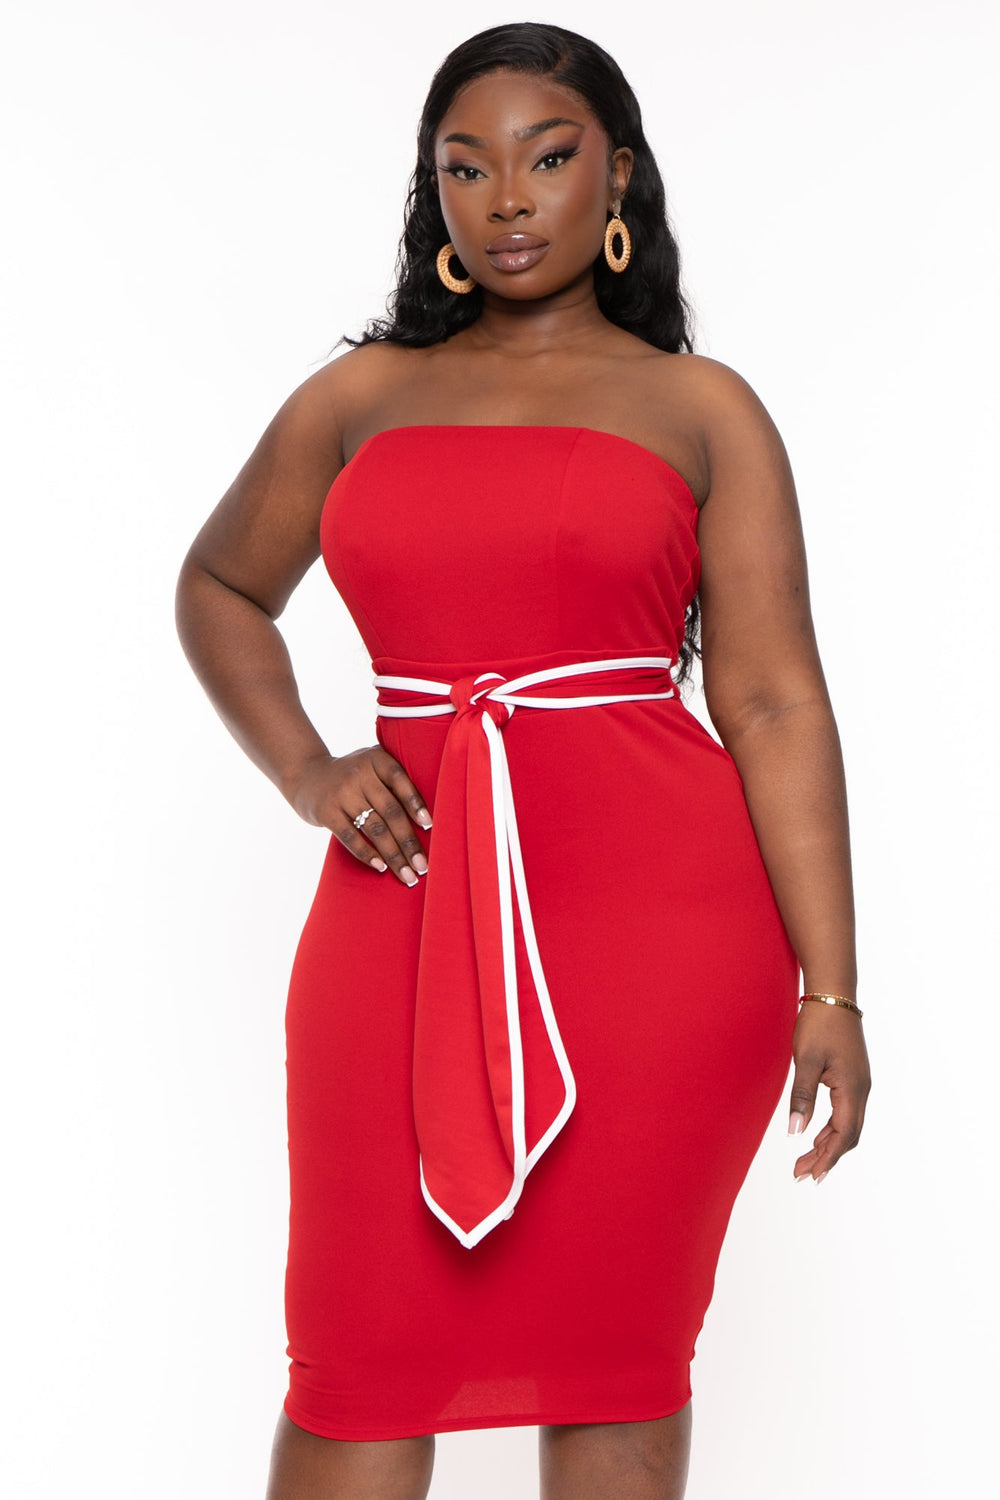 Curvy Sense - ❤❤❤ Red Hot. @cocoalicious32 is one hot Mama in the  ASYMMETRIC ONE SHOULDER DRESS. 40% off sitewide with discount code BASH40.  #curvysensedoll #curvysense